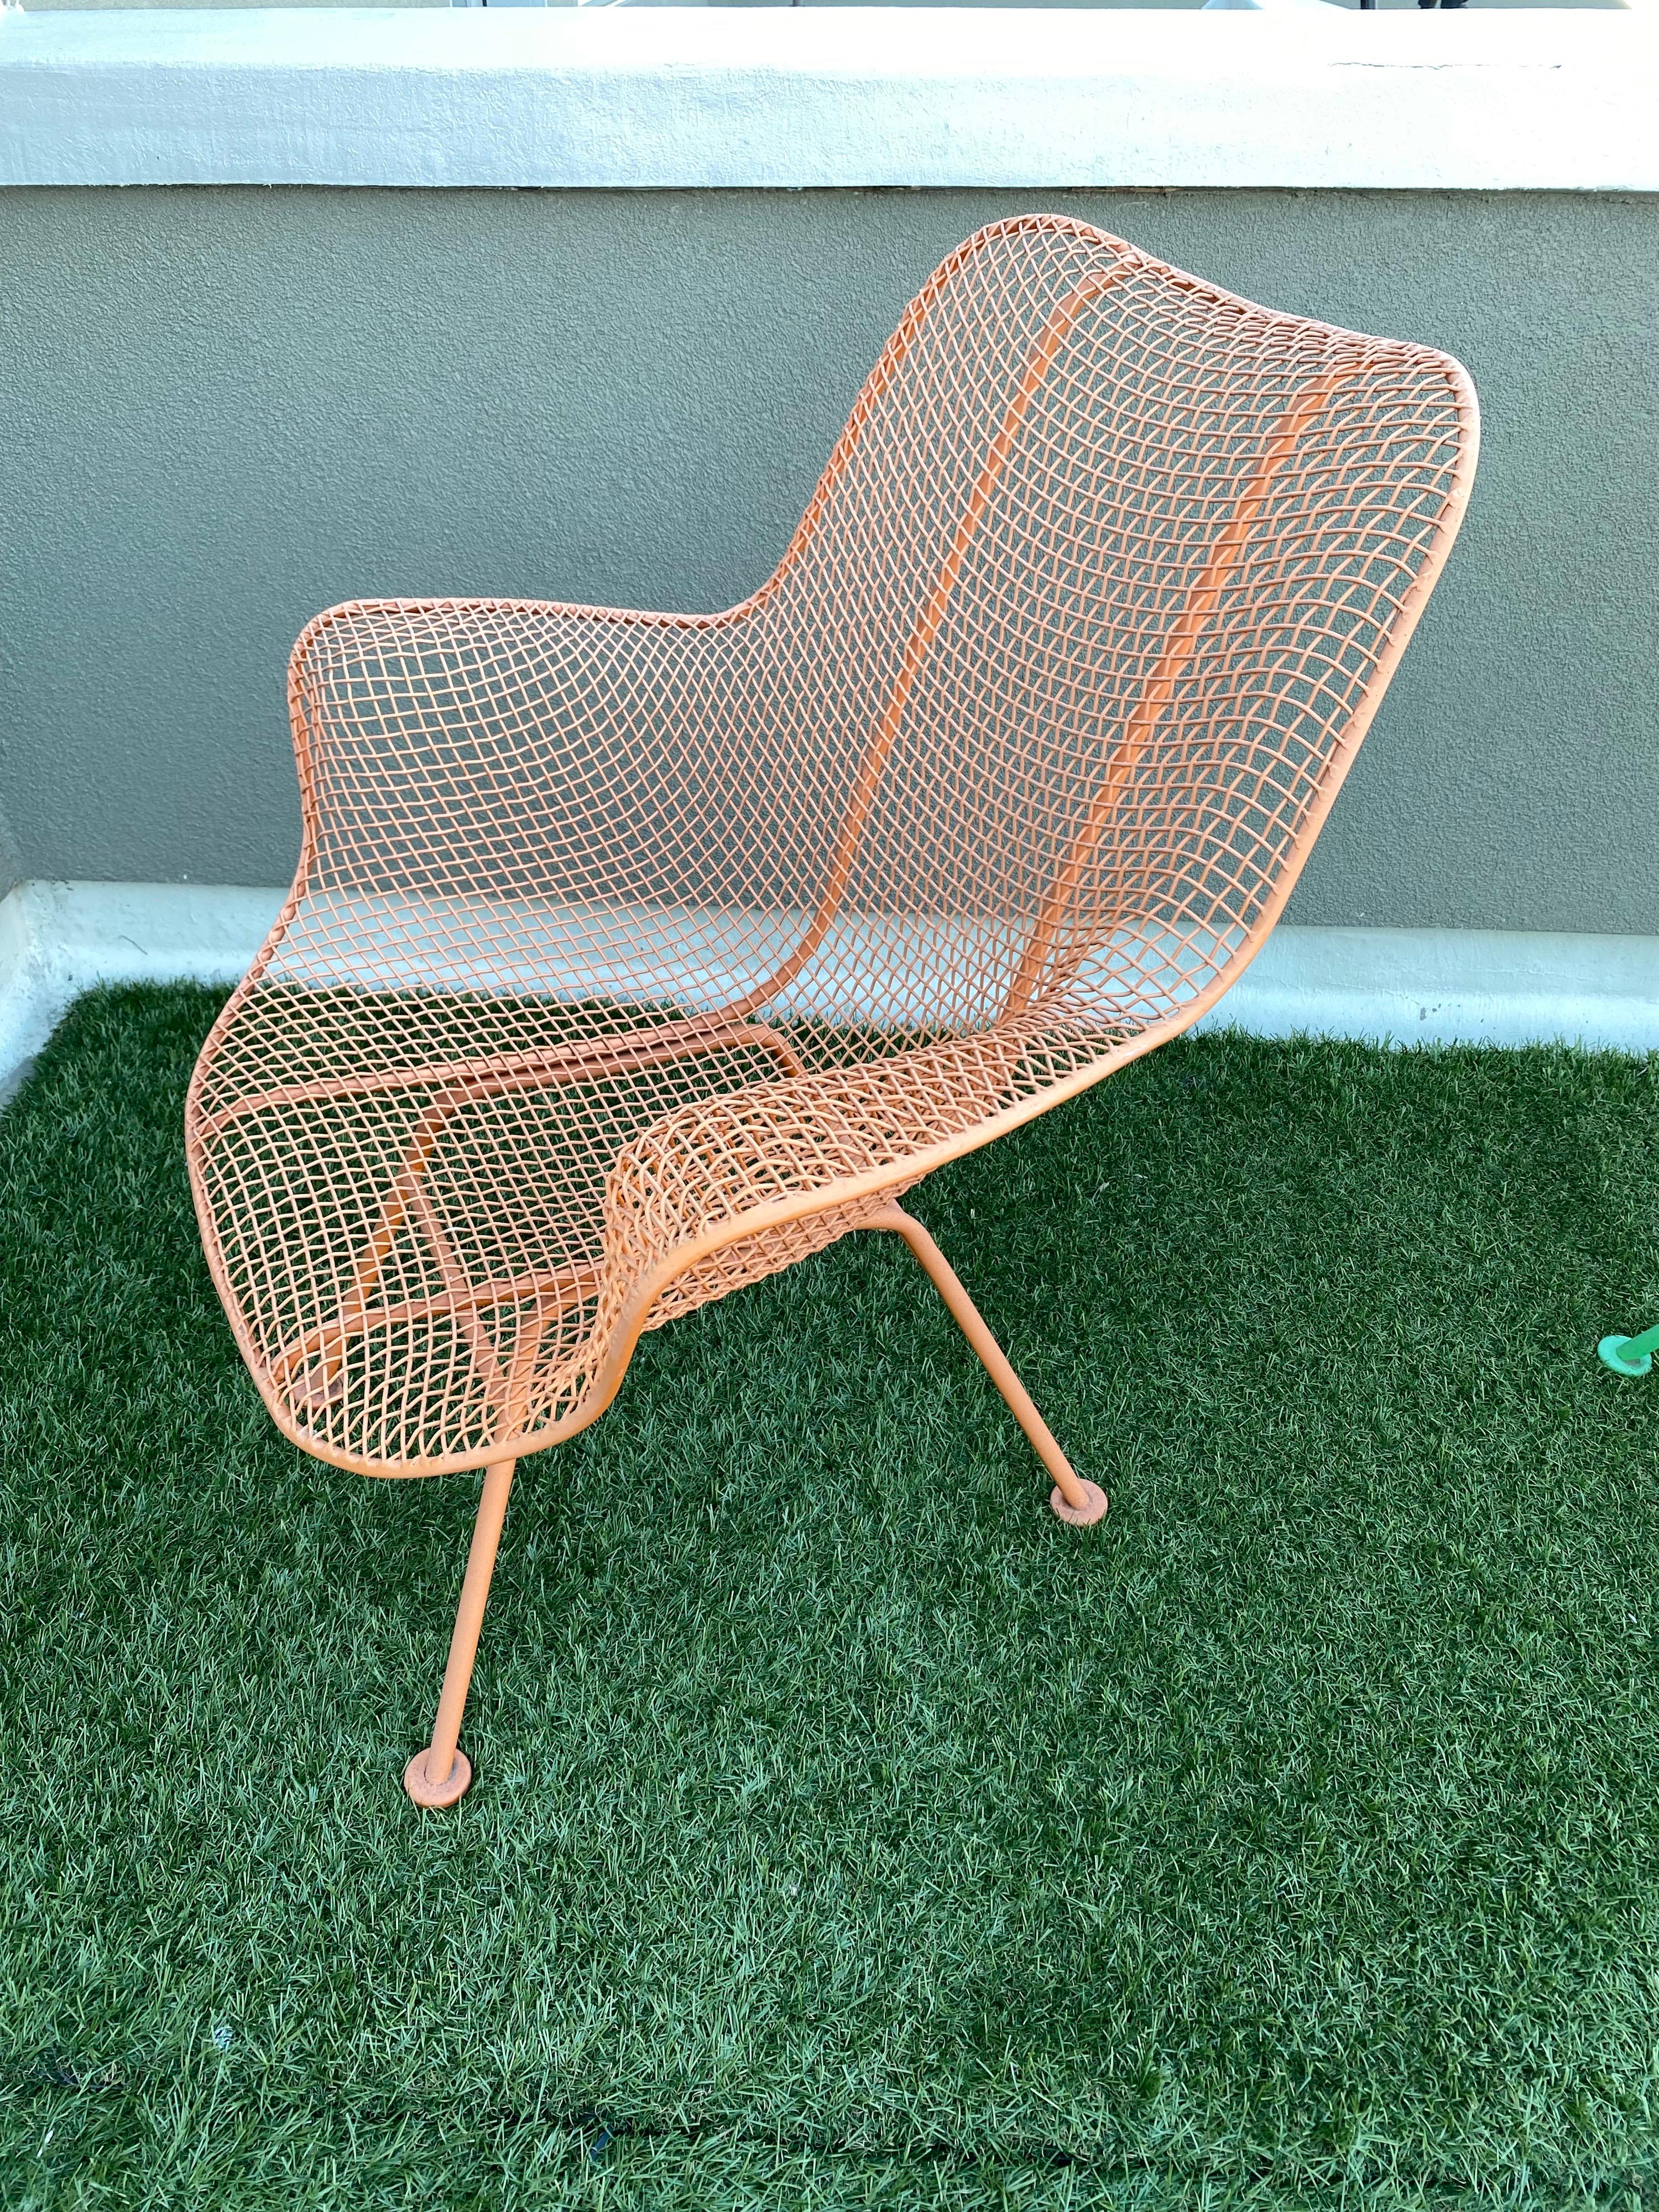 Pair of Russell Woodard high back lounge chairs. Powder coated about 15 years ago. Still look very good with slight fading to finish.